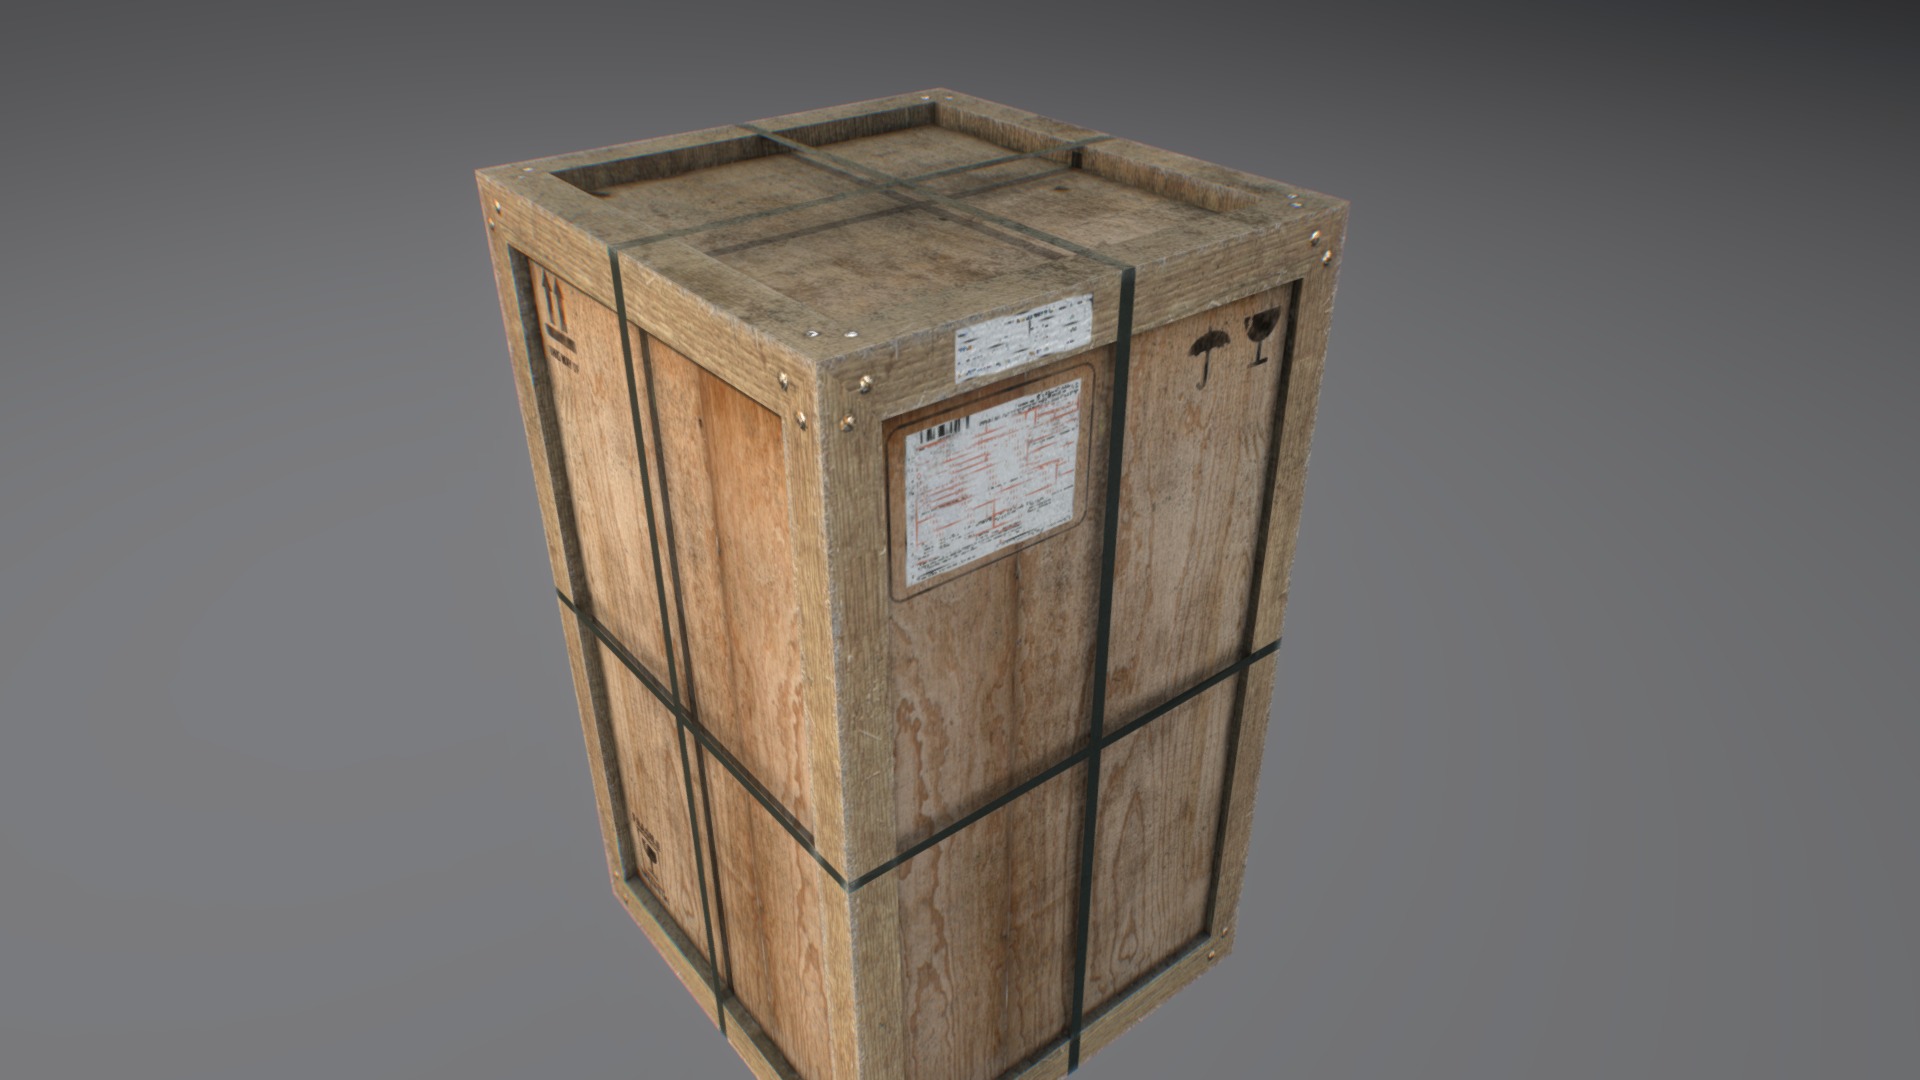 3D model Old wooden cargo crate 13 - This is a 3D model of the Old wooden cargo crate 13. The 3D model is about a wooden box with a sign on it.